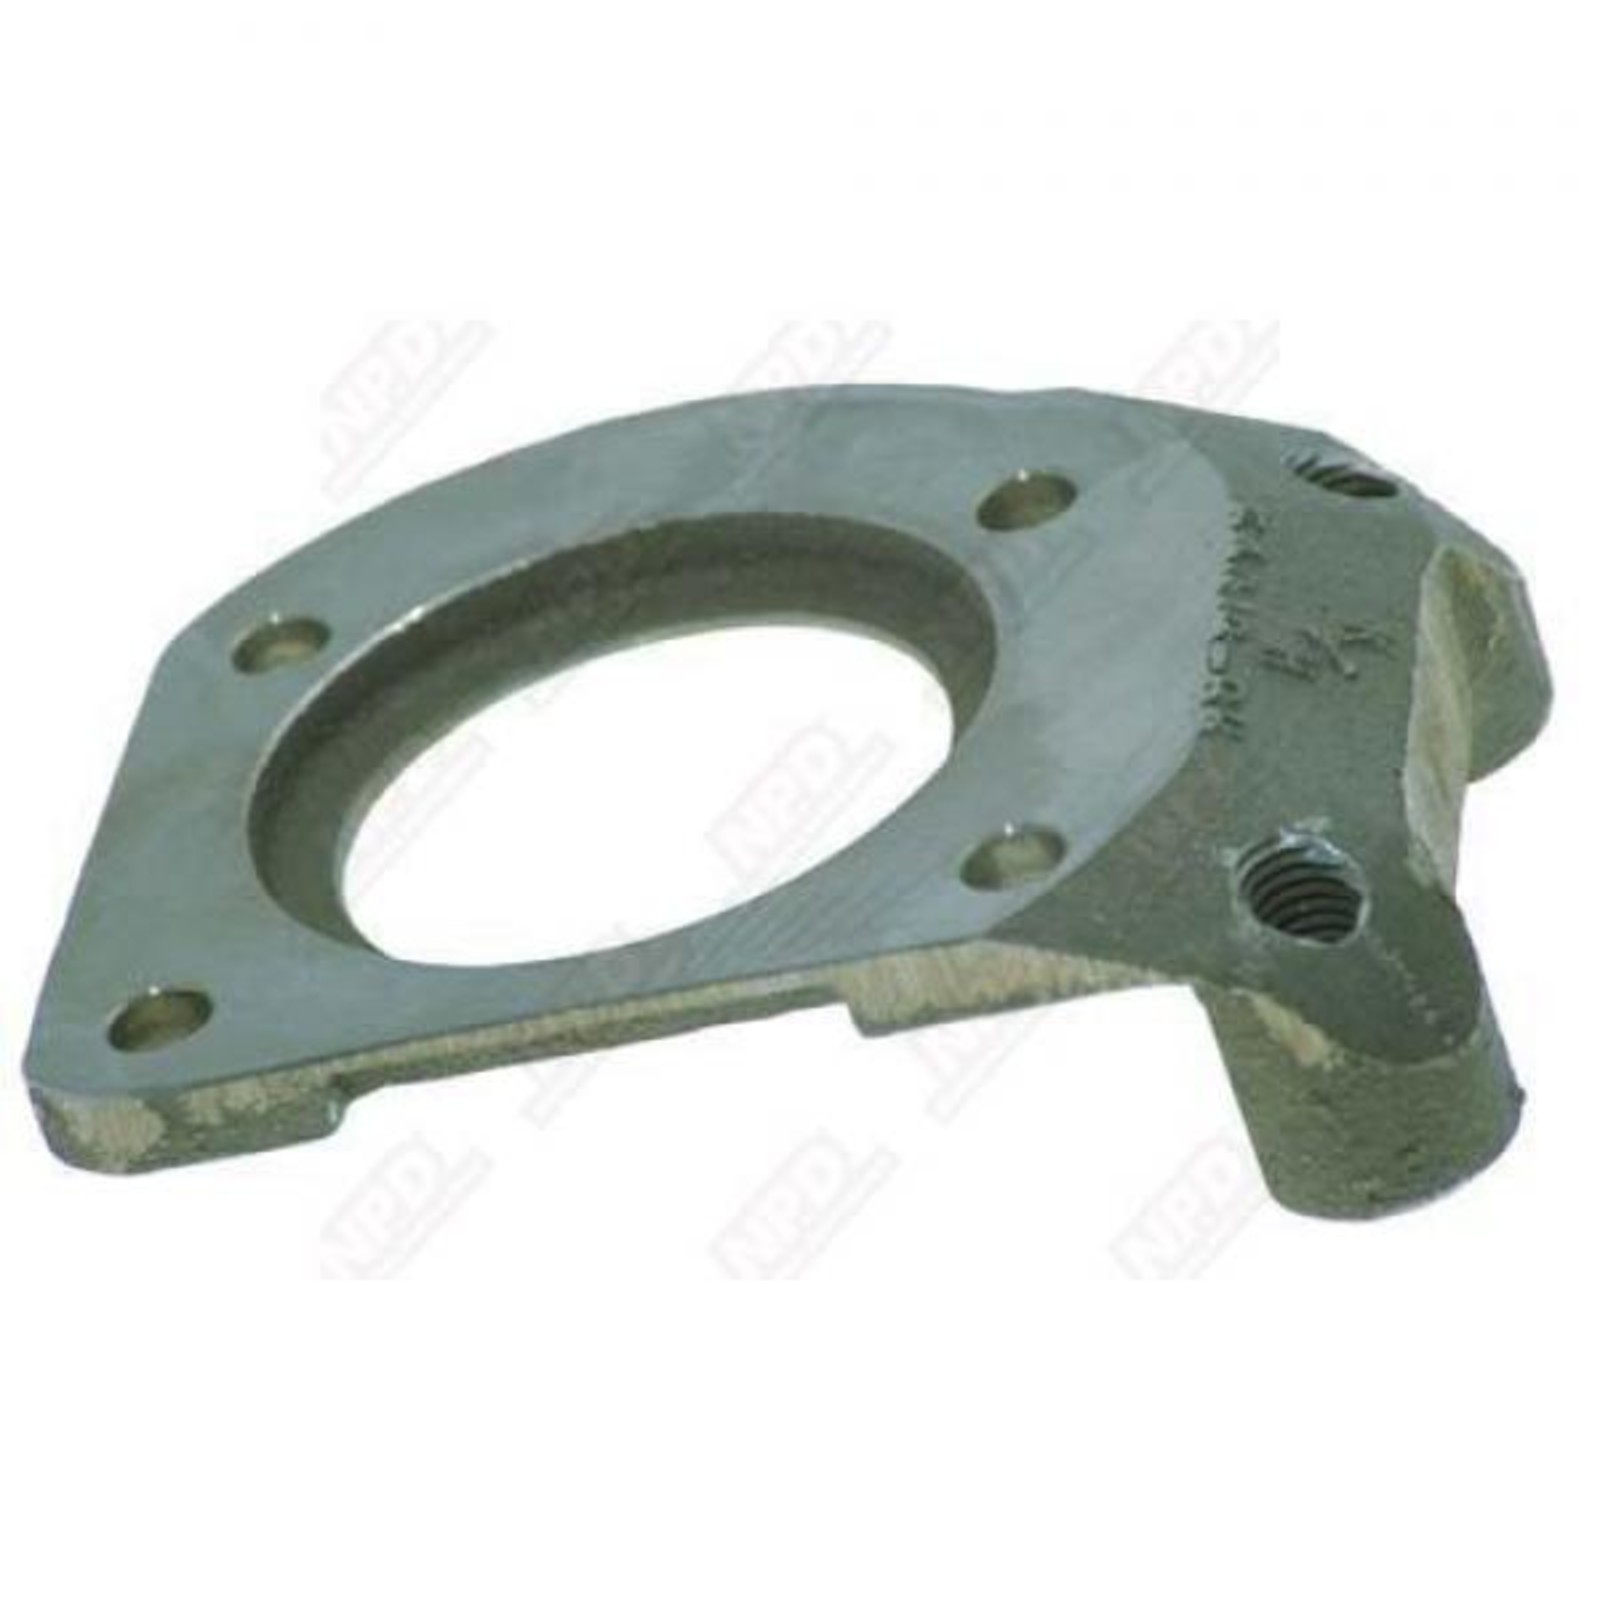 65-67 BRACKET CALIPER TO SPINDLE LH